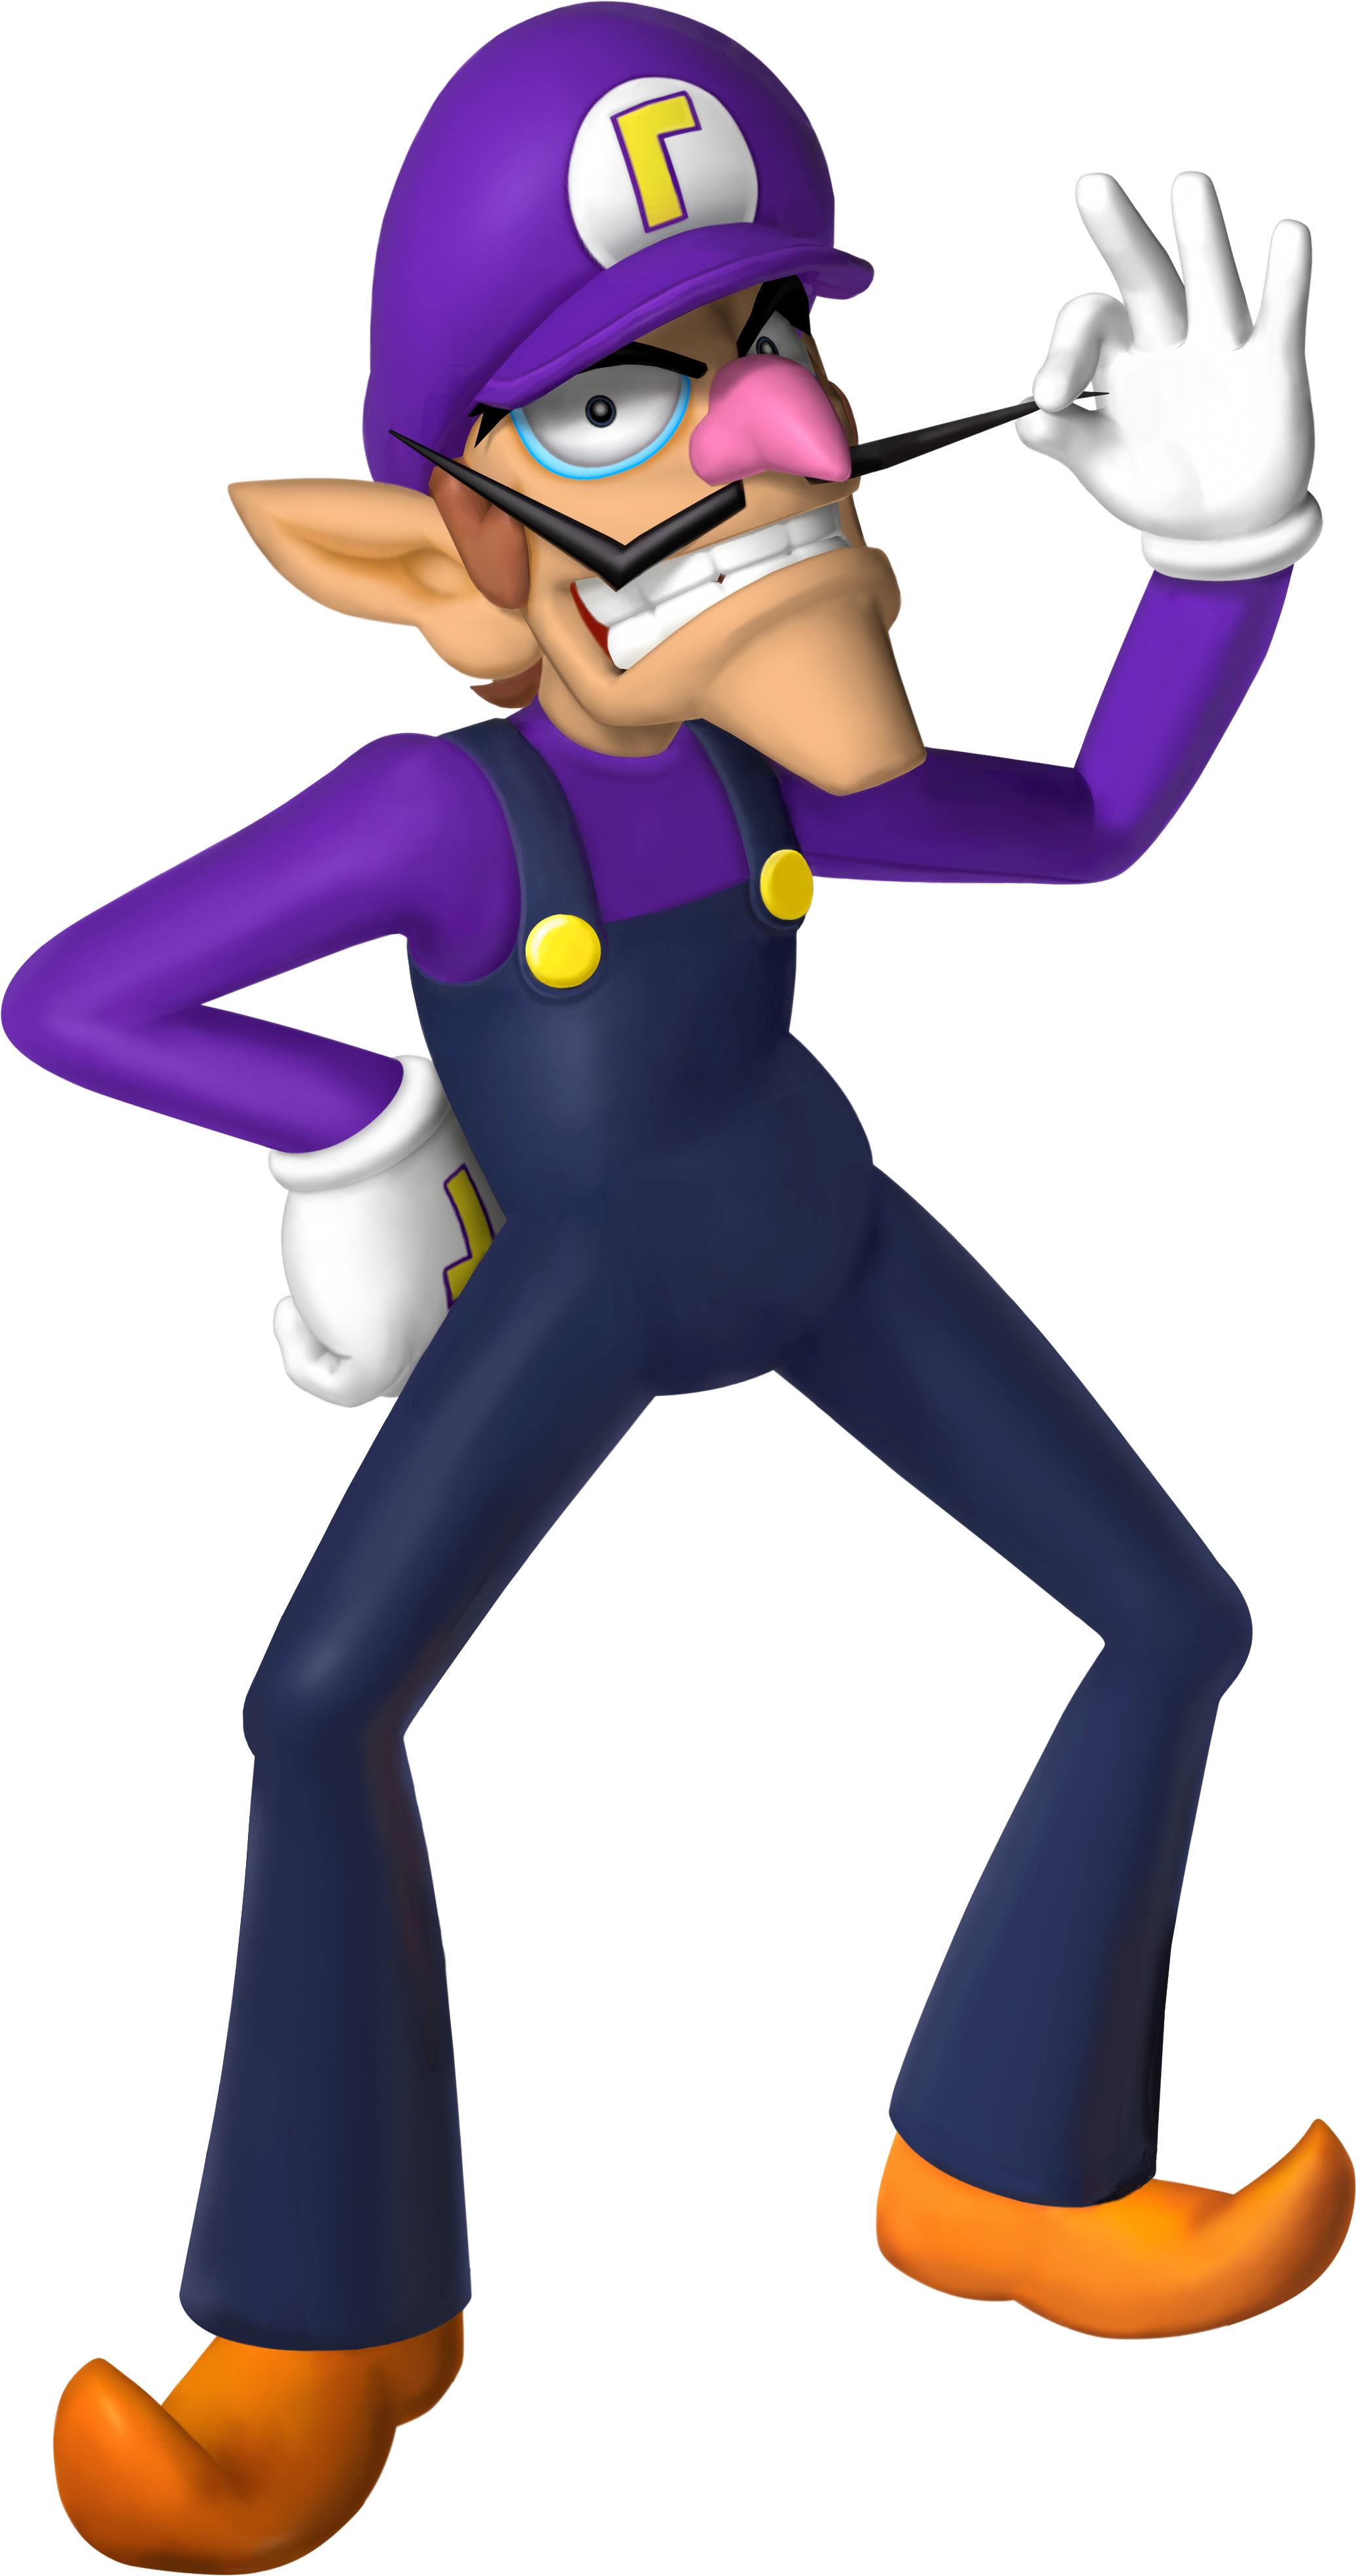 Artwork of Waluigi for Mario Party 6 (reused for Dance Dance Revolution: Mario Mix, Mario Party 7, Mario & Sonic at the Olympic Games and Mario Kart Wii)